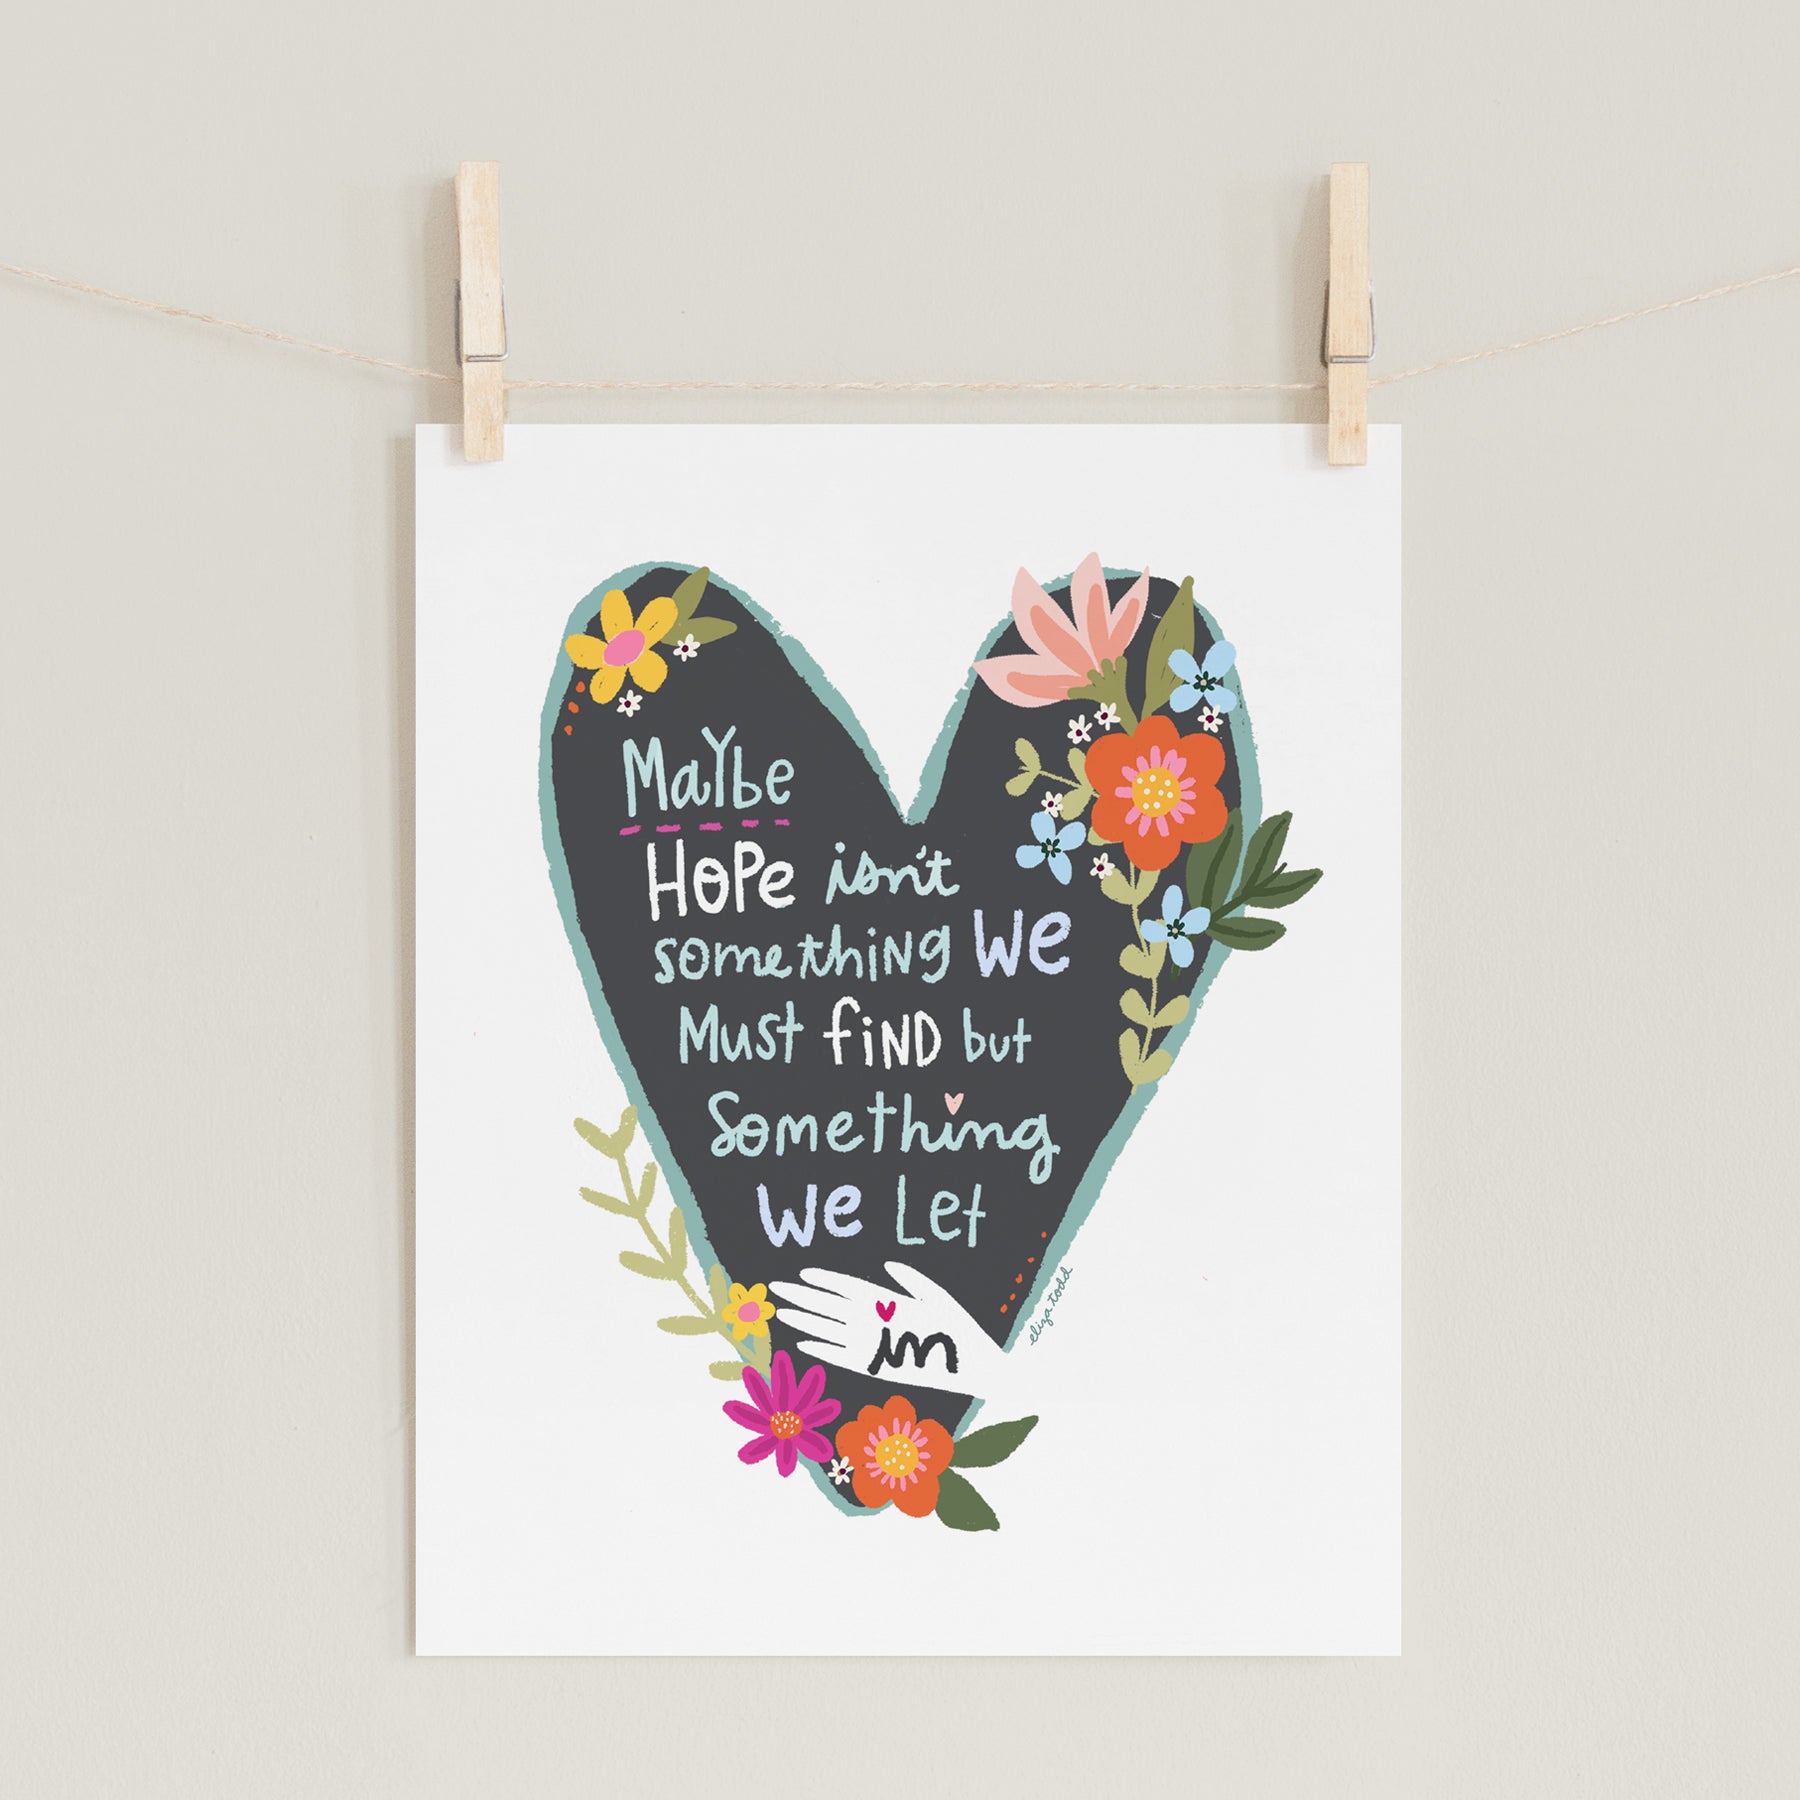 Fine art prints by Eliza Todd featuring bright florals in a heart saying "Maybe hope isn't something we must find but something we must let in." - APeaceofWerk.com